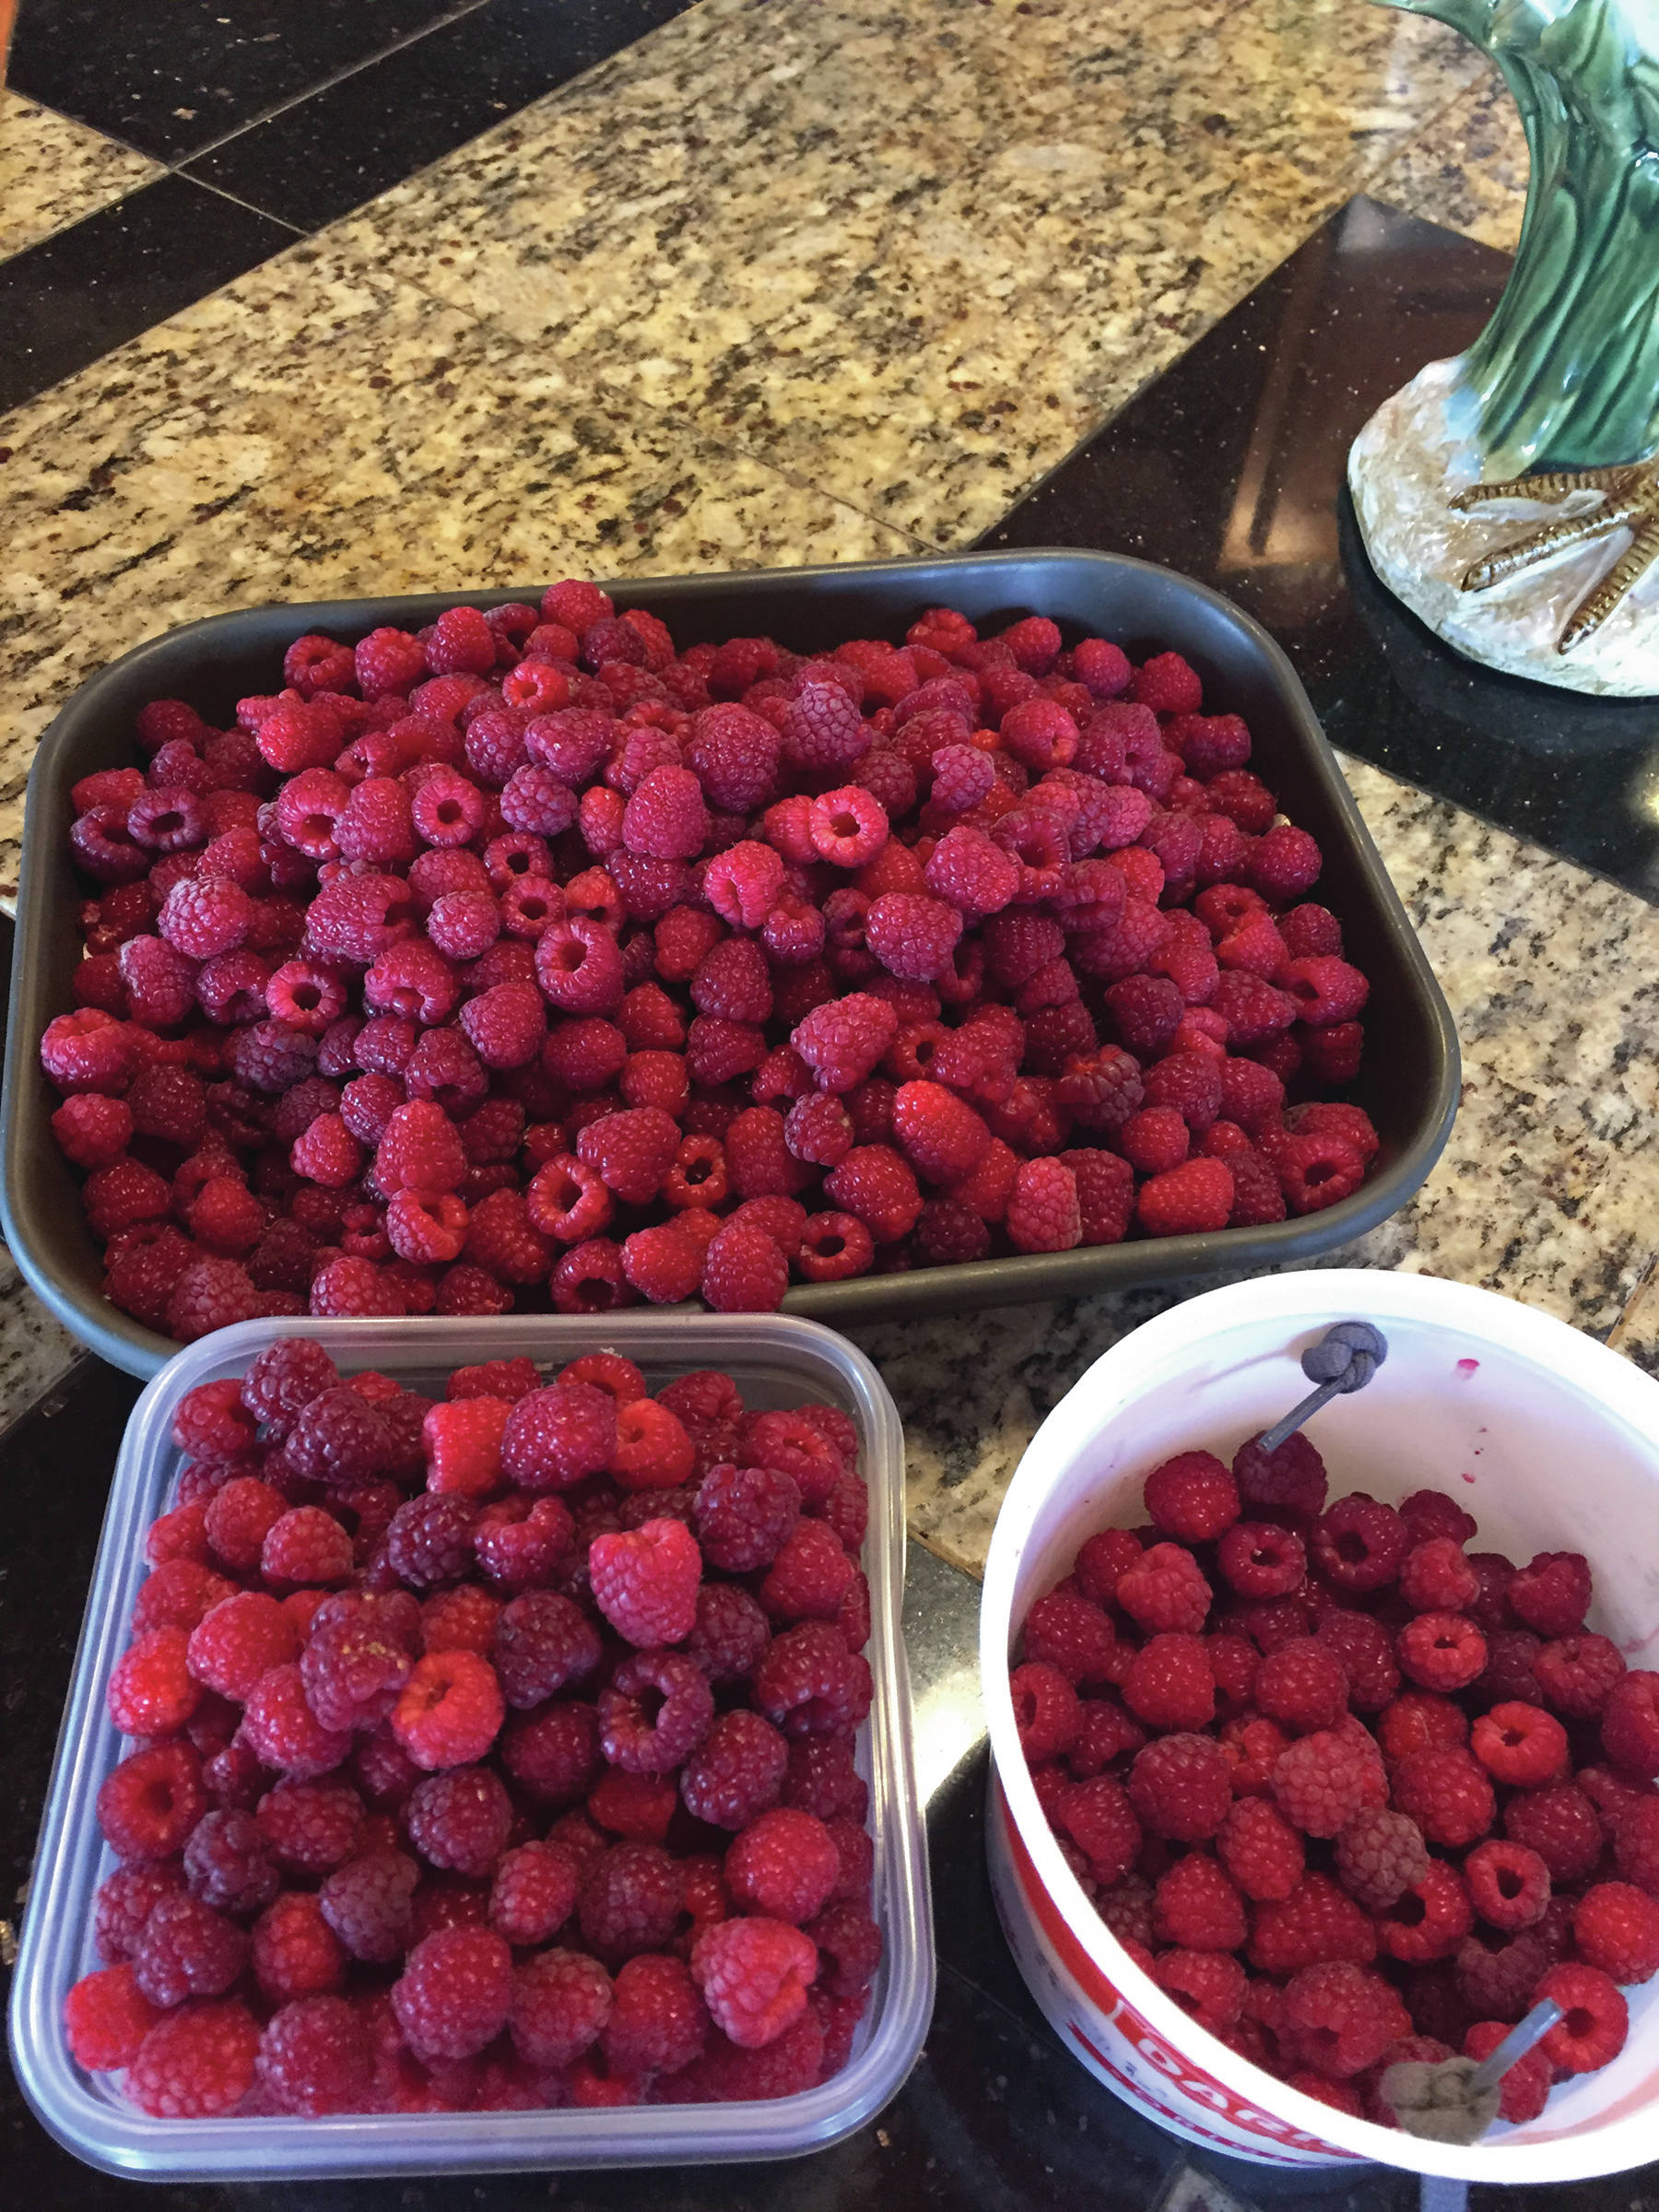 Photo by Teri Robl                                 Teri Robl collected some beautiful raspberries for her Raspberry Swamp Pie on Aug. 11 from her Homer, Alaska, garden.